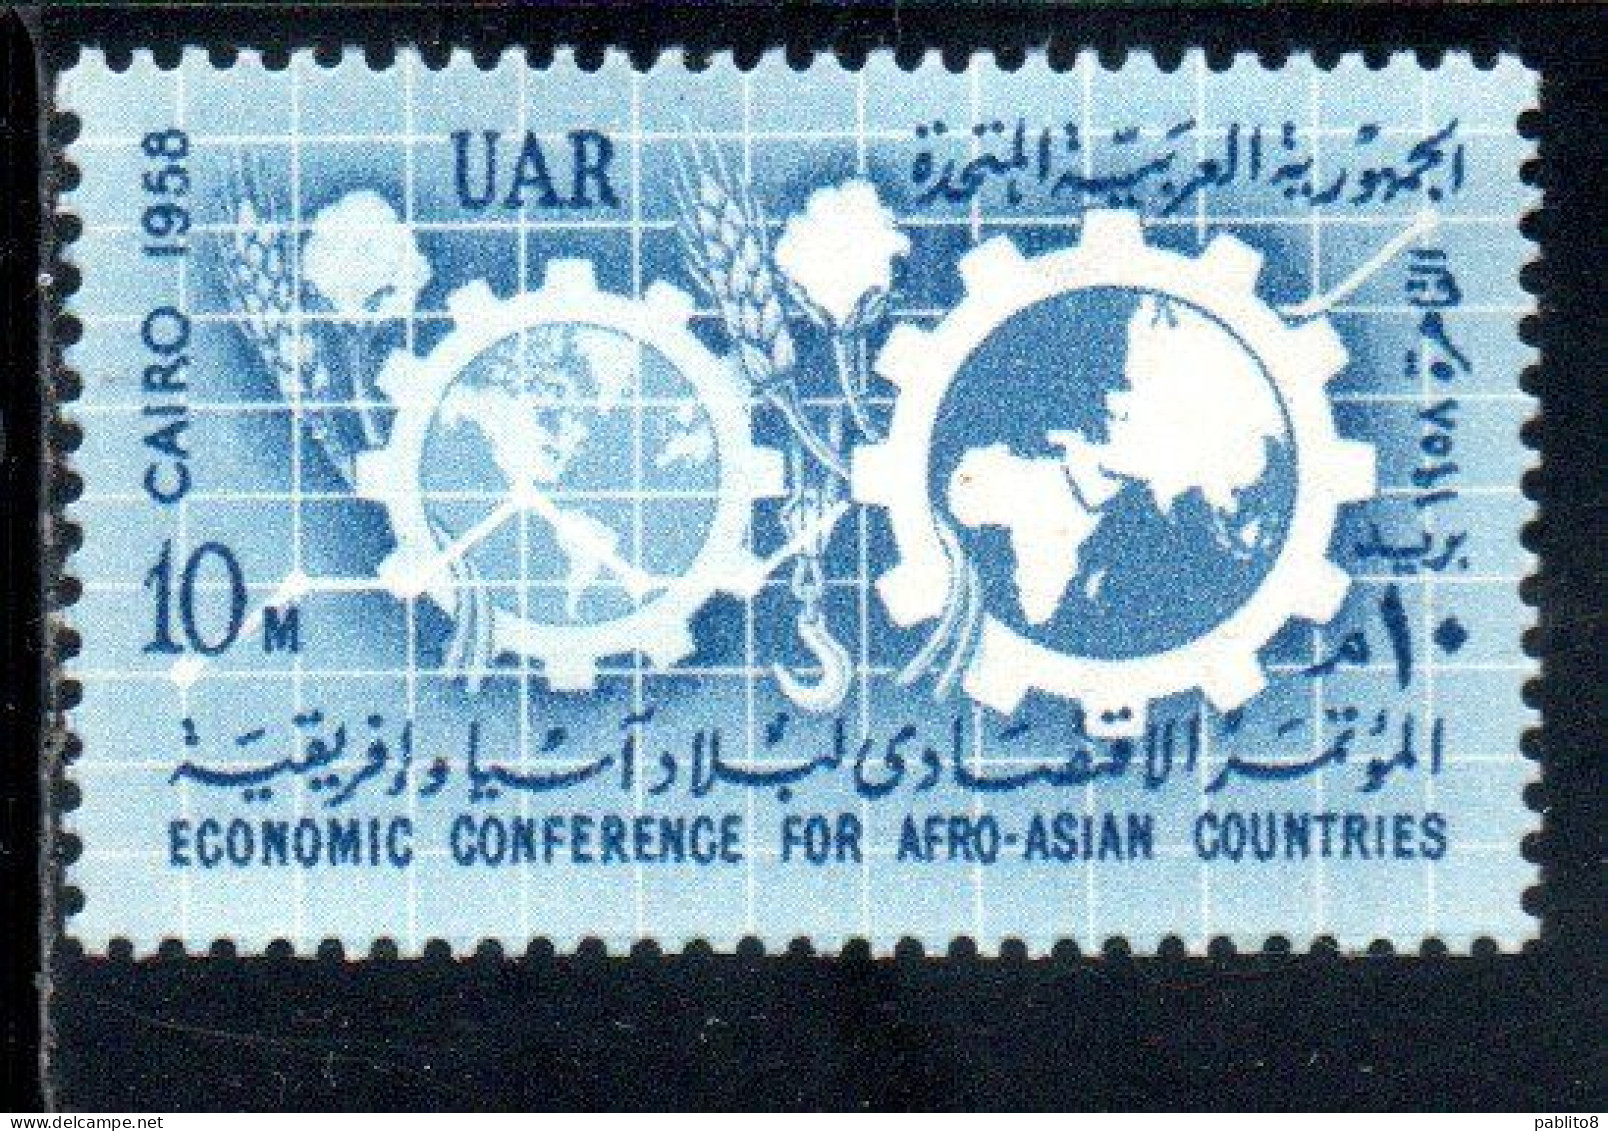 UAR EGYPT EGITTO 1958 ECONOMIC CONFERENCE OF AFRO-ASIAN COUNTRIES CAIRO MAPS AND COGWHEELS 10m MNH - Ungebraucht